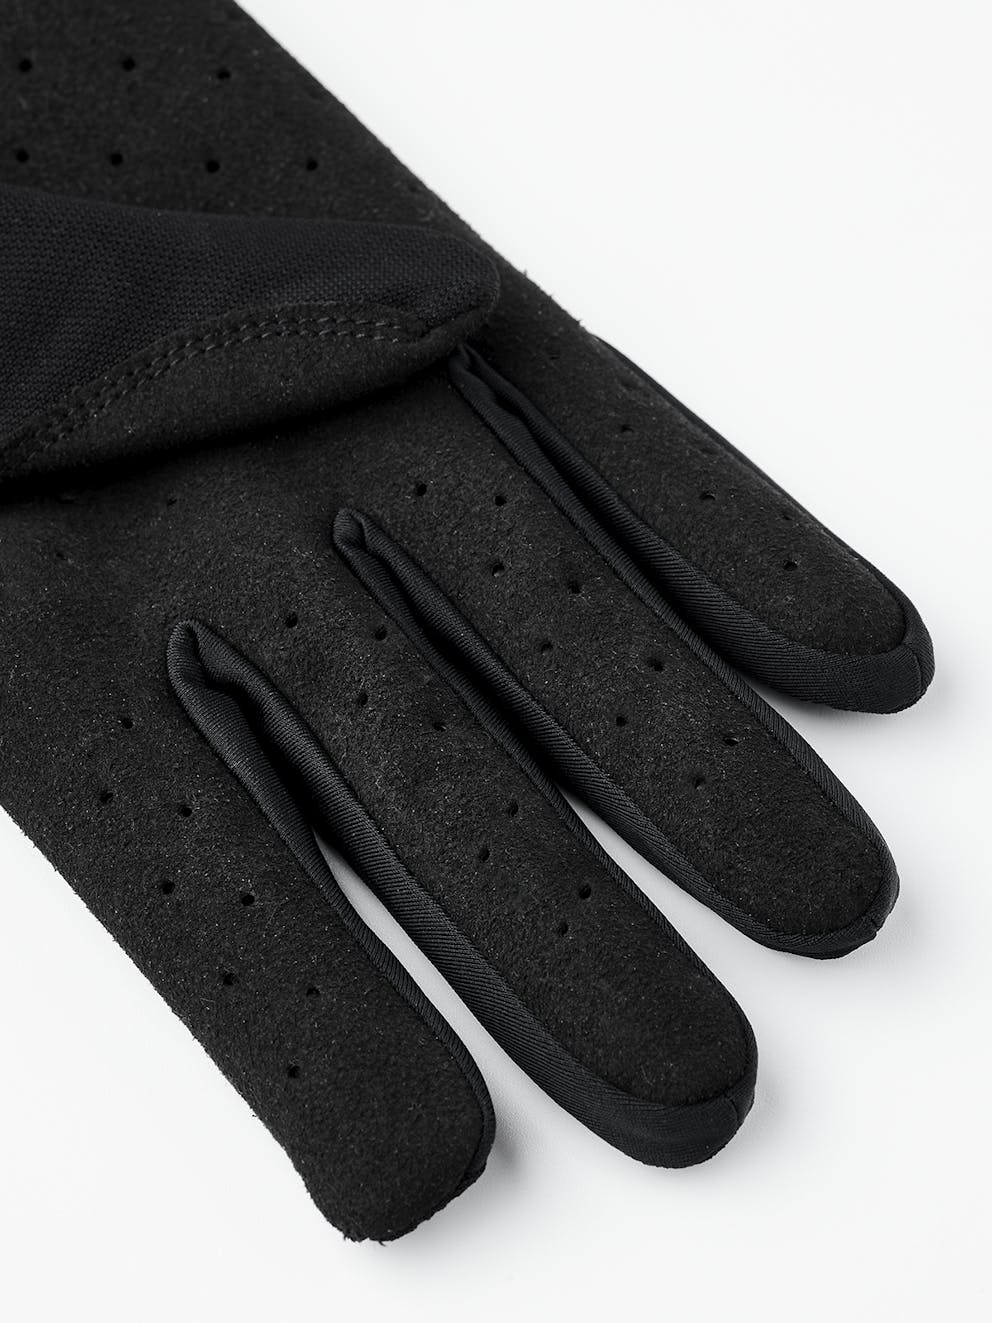 Women's Perforated Fingerless Glove - Chic and Functional